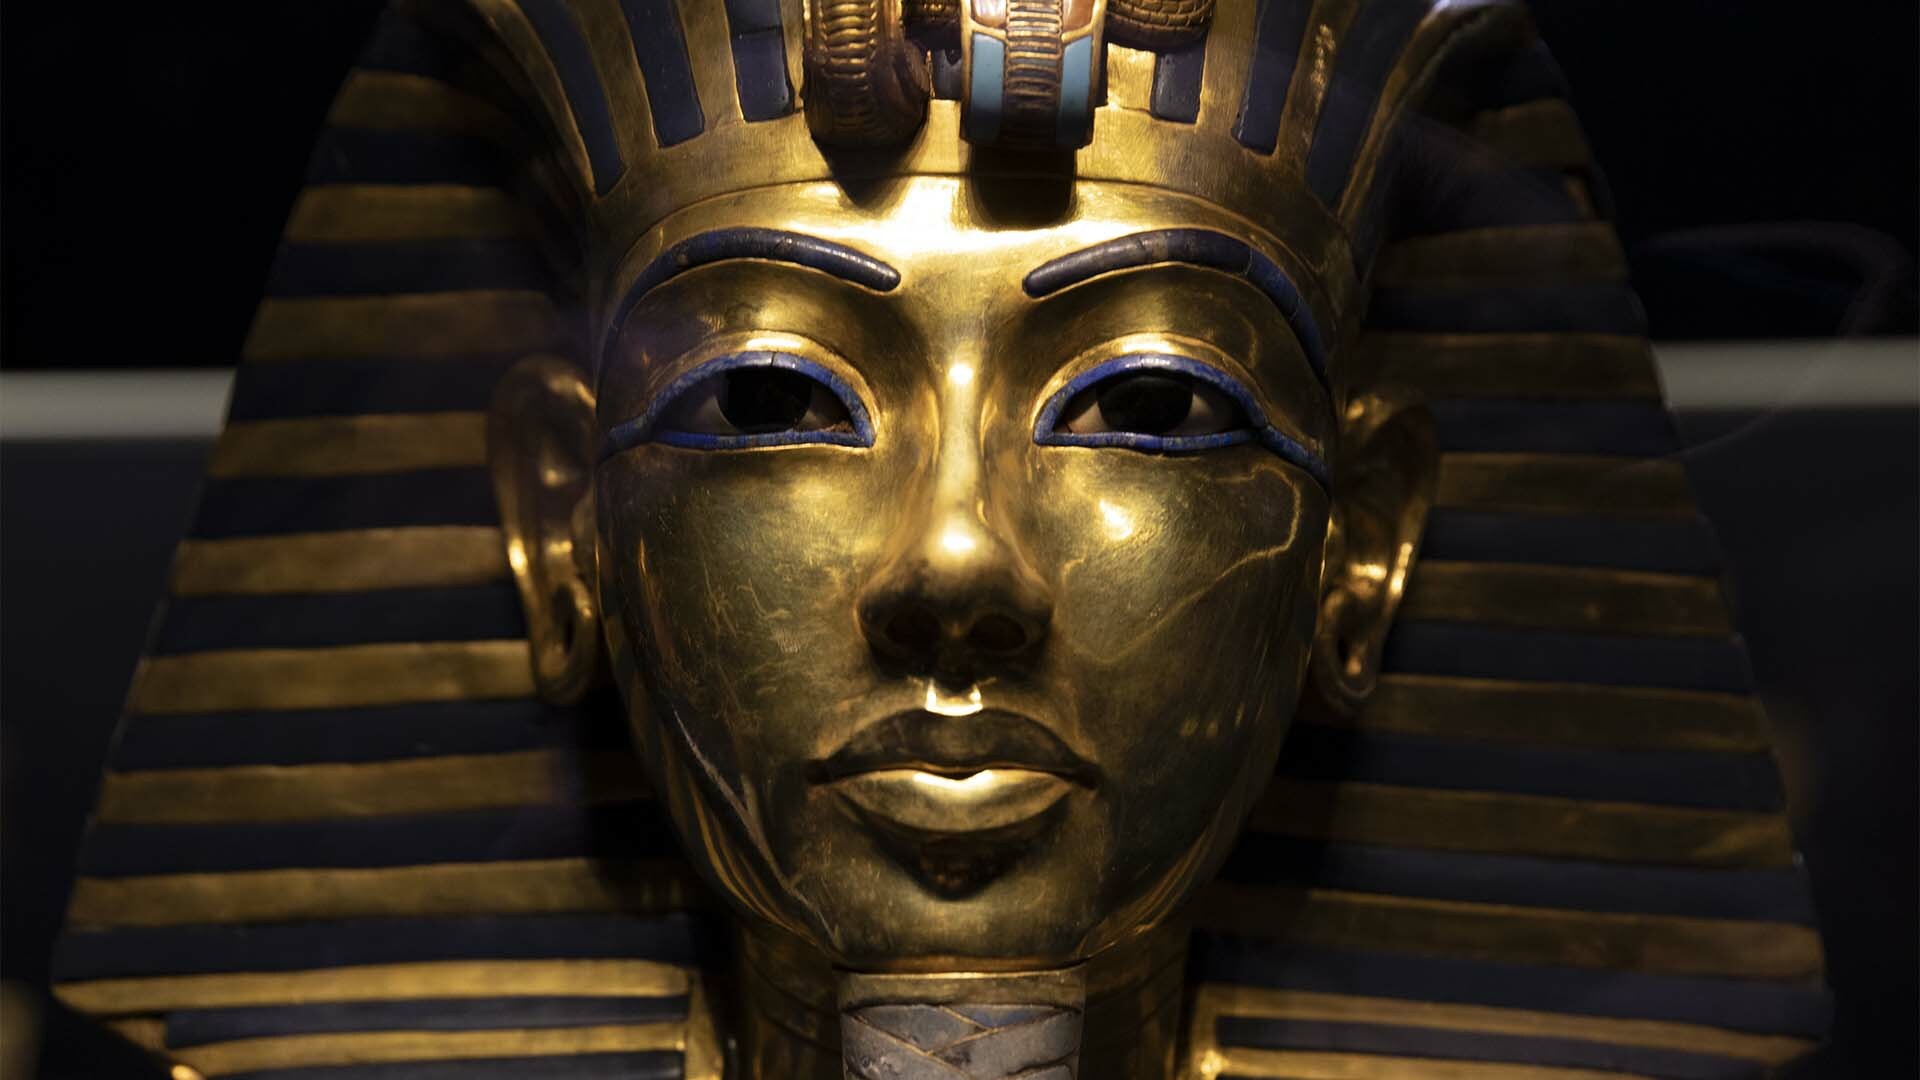 Closeup image of the mask of King Tutankhamun in the Egyptian Museum.